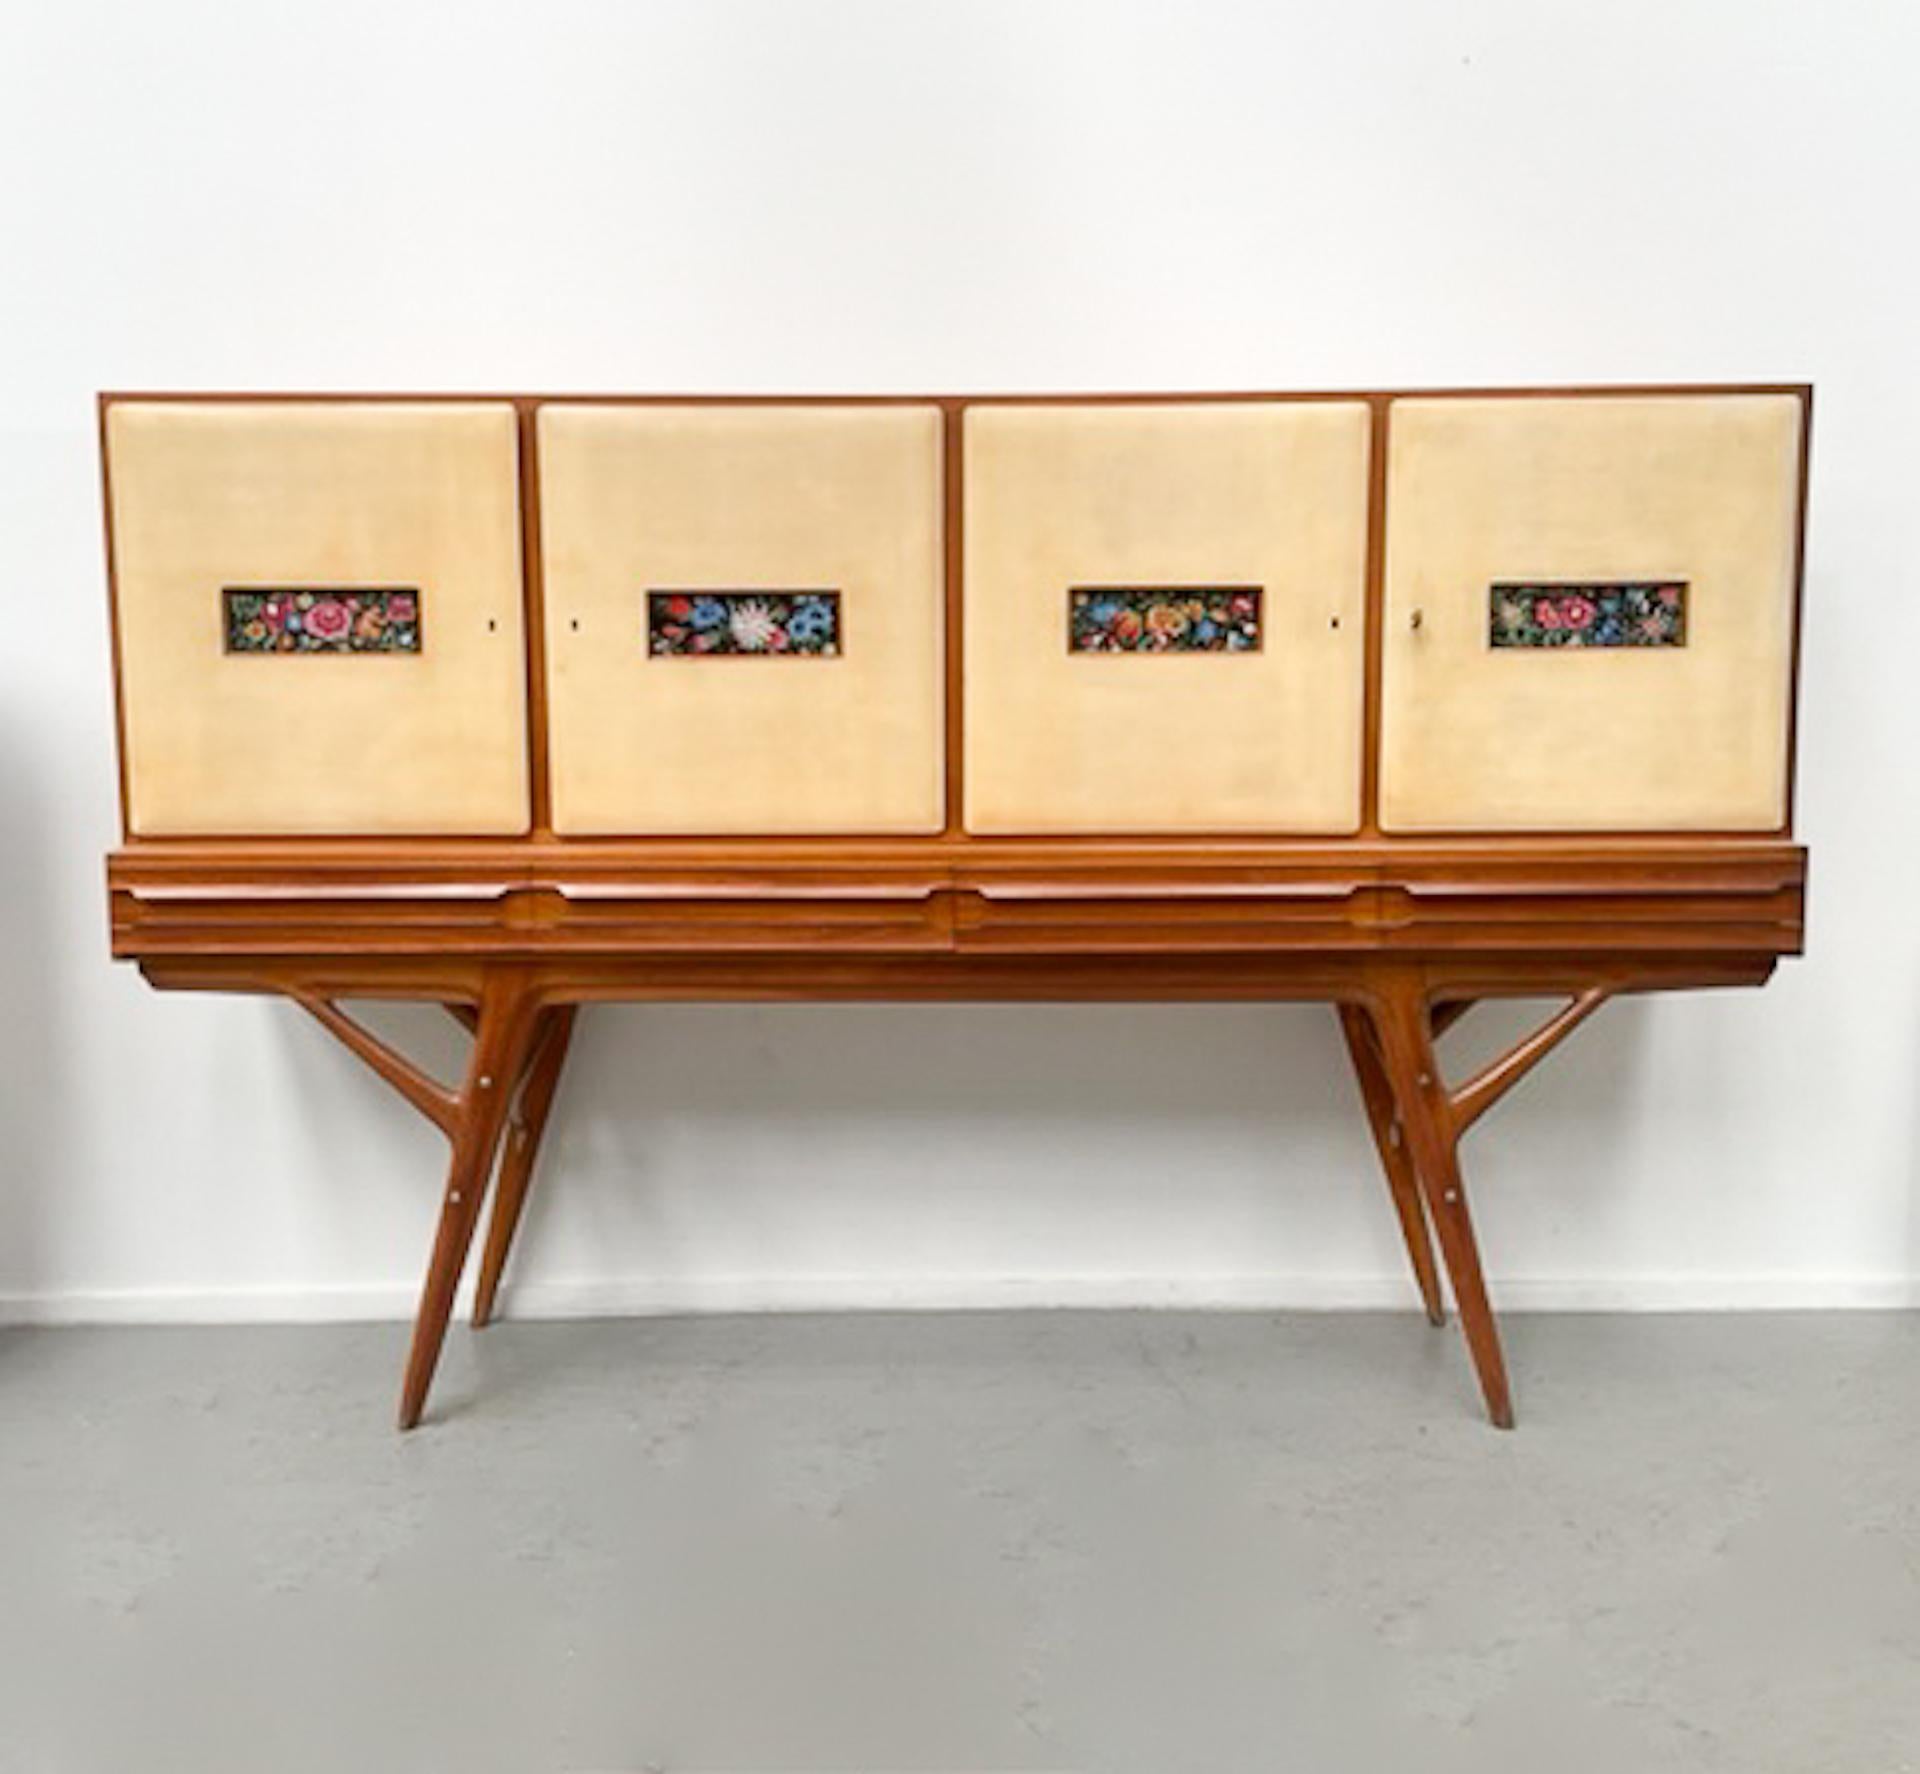 Mid-Century Modern Italian Sideboard attributed to Ico Parisi, Italy, 1960s
Wood and Painted glass.